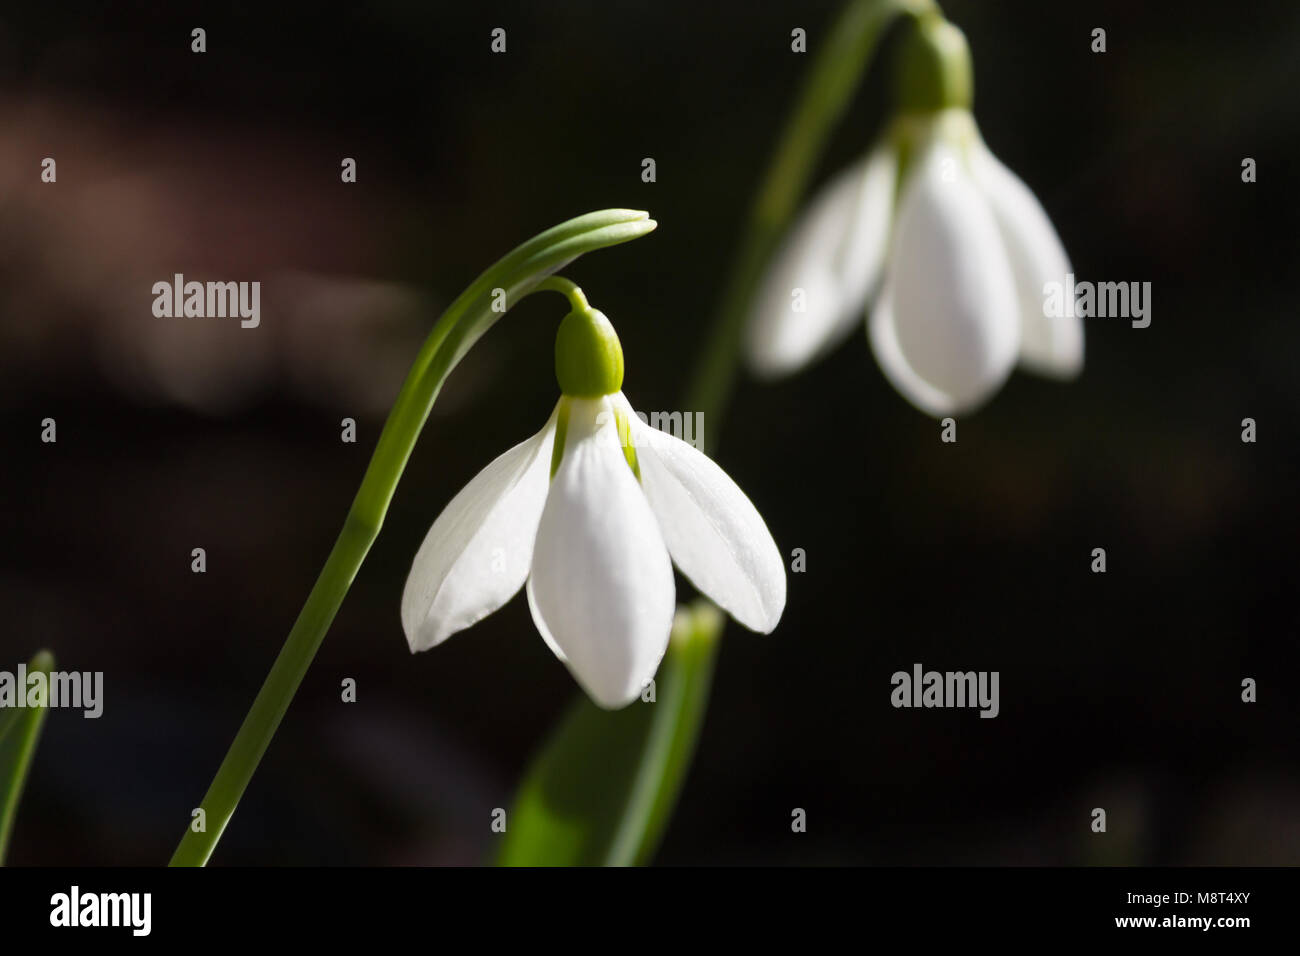 Blossoming snowdrop close-up on blurred white flower background. Stock Photo